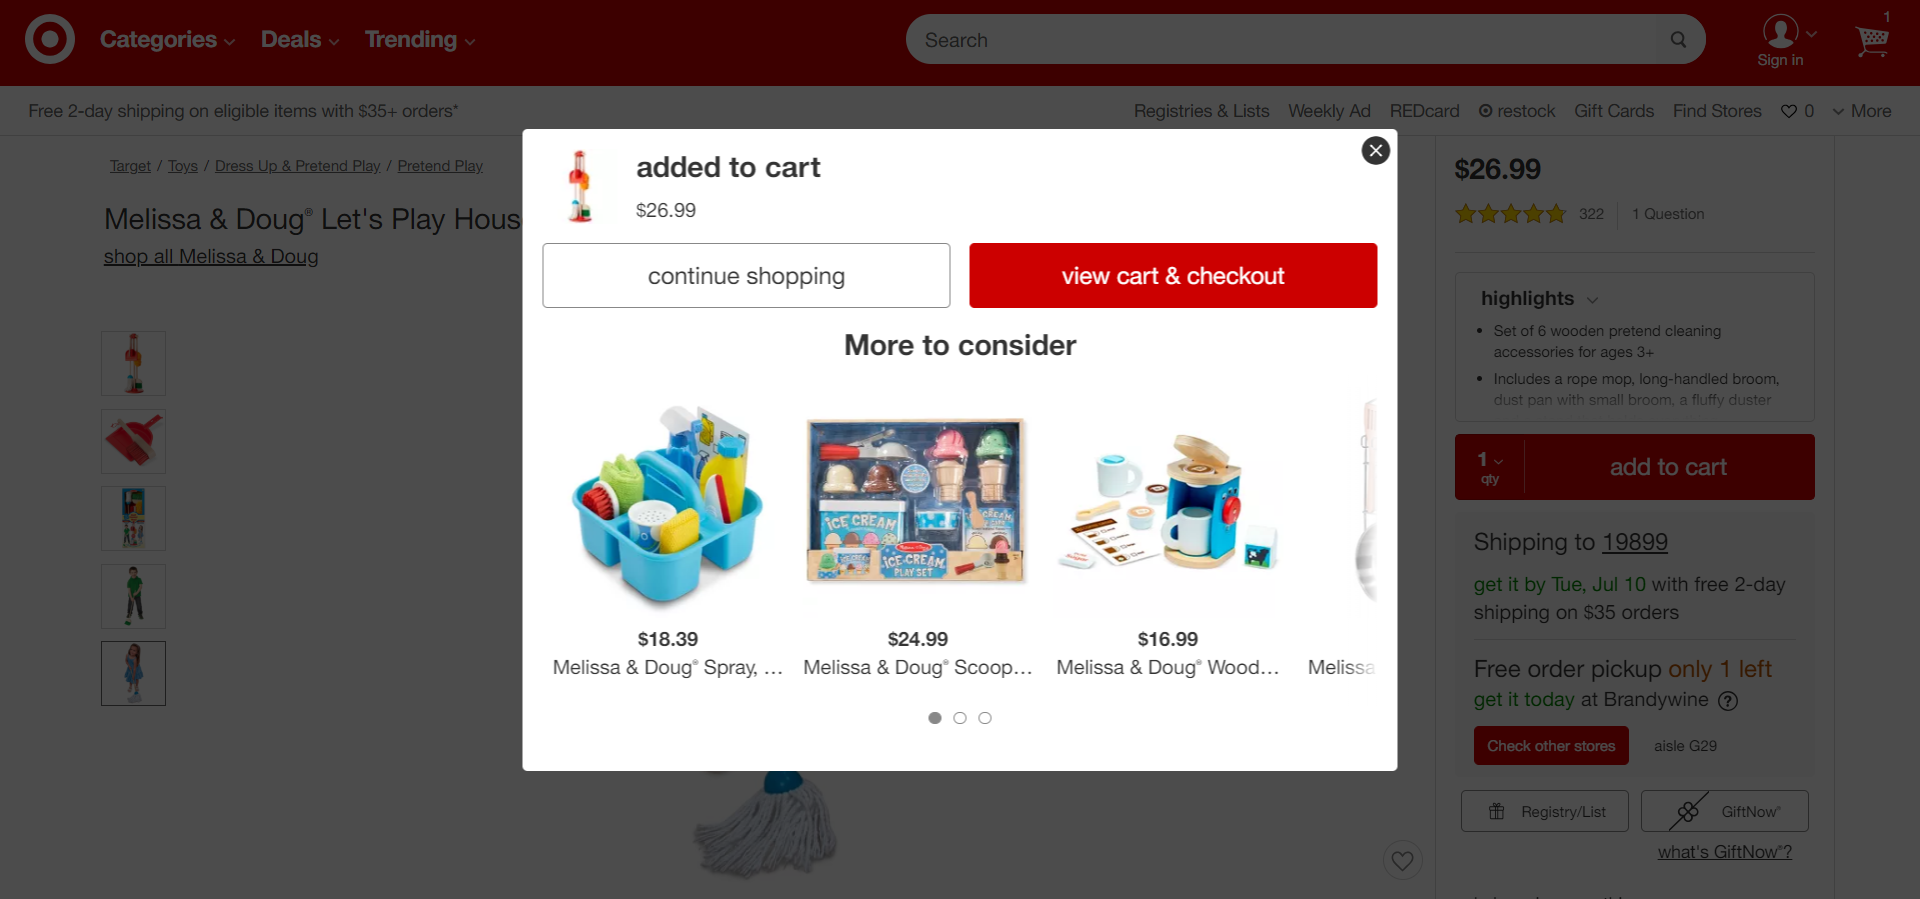 ways to increase average order value - showing related products example - target.com product detail page grayed out with added-to-cart pop-up. below the "added to cart" message are a "continue shopping" ghost button and a red "view cart & checkout" button. under the buttons is a "more to consider" section with a carousel of recommended products